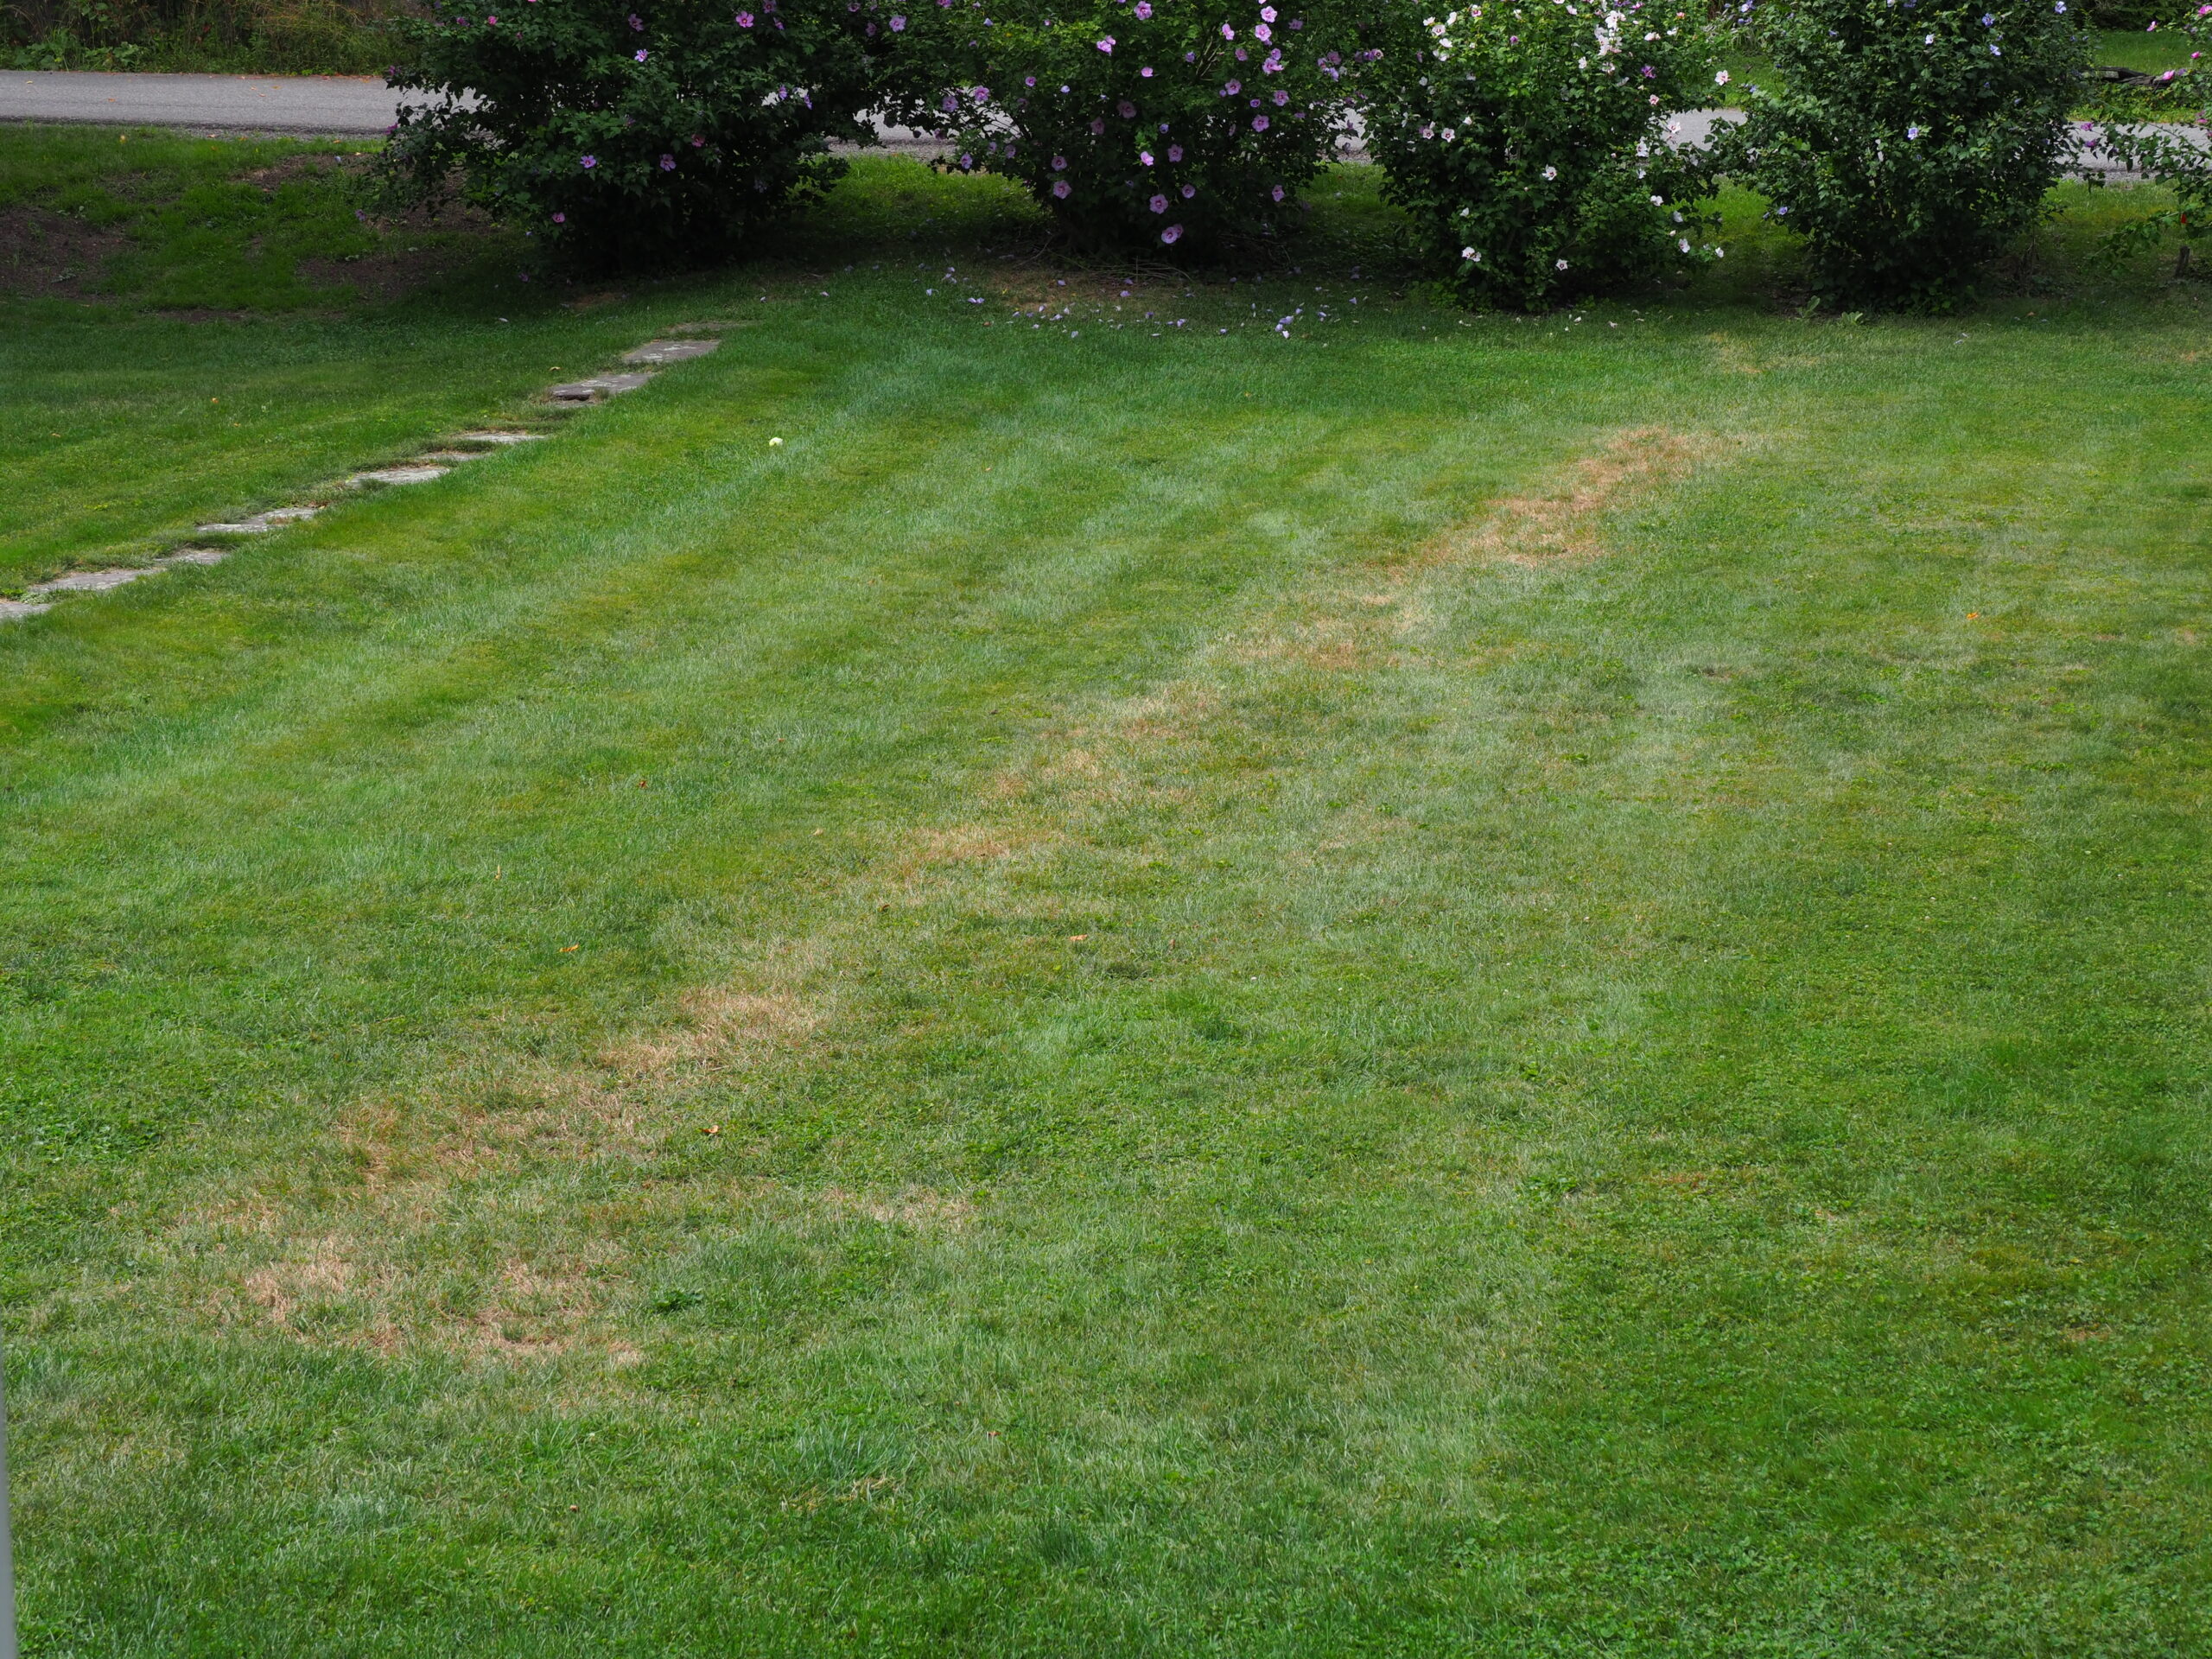 The Hampton Gardener's lawn suffering from drought. The brown 2-foot-wide swath is where a water main was replaced decades ago and very sandy soil was used as backfill.  As a result, this strip always browns out before anything else.
